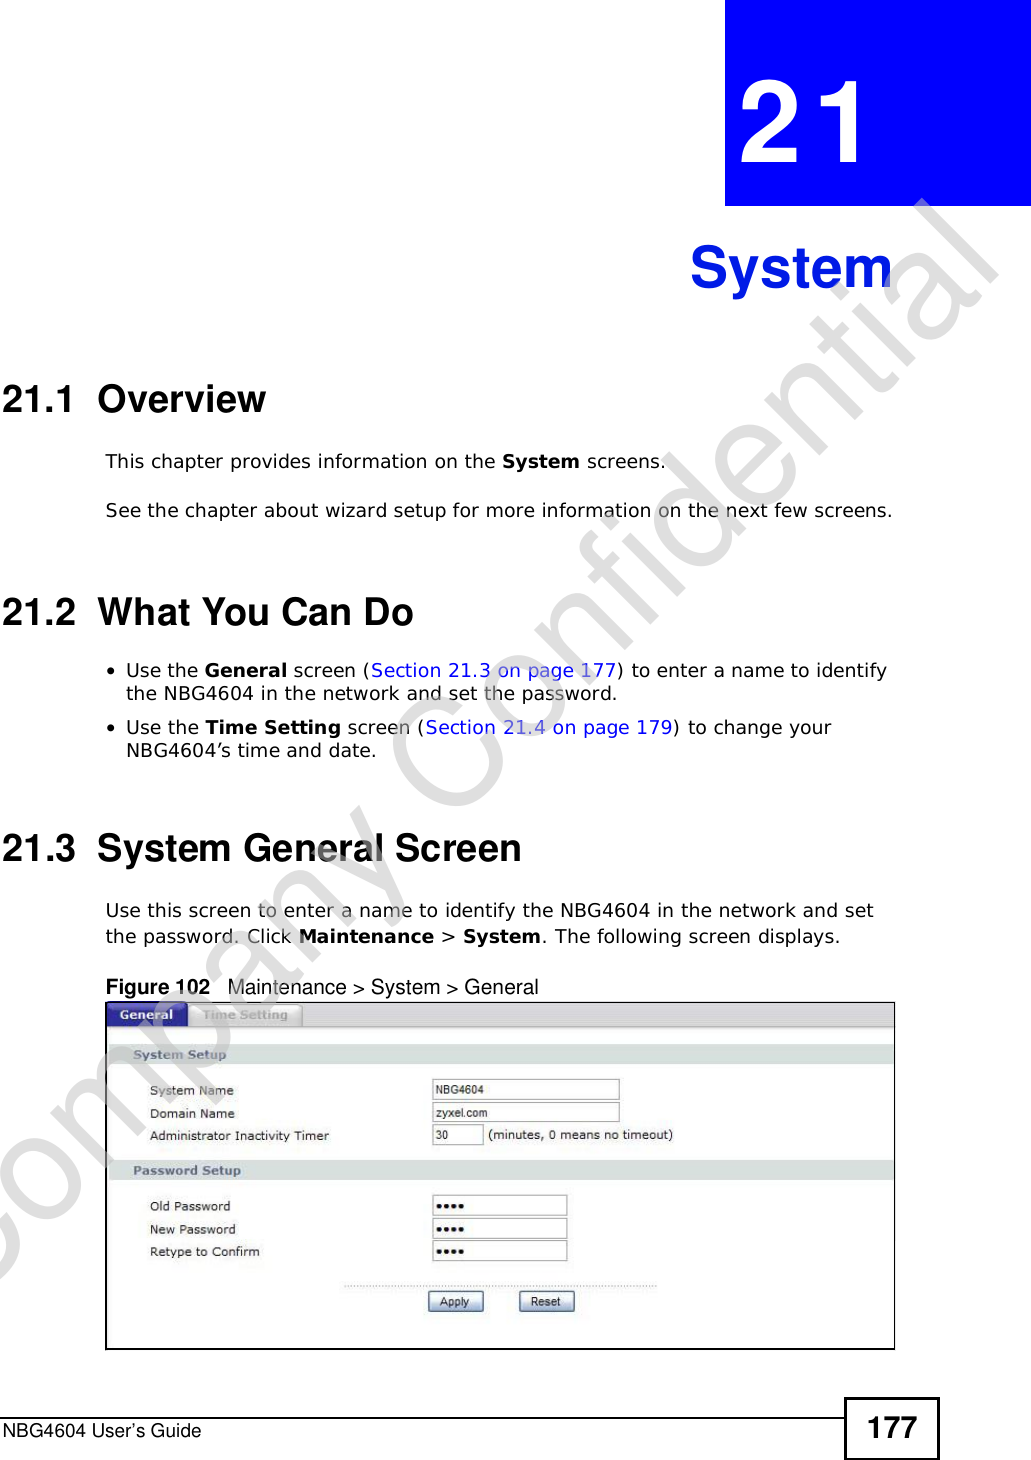 NBG4604 User’s Guide 177CHAPTER 21System21.1  OverviewThis chapter provides information on the System screens. See the chapter about wizard setup for more information on the next few screens.21.2  What You Can Do•Use the General screen (Section 21.3 on page 177) to enter a name to identify the NBG4604 in the network and set the password.•Use the Time Setting screen (Section 21.4 on page 179) to change your NBG4604’s time and date.21.3  System General Screen Use this screen to enter a name to identify the NBG4604 in the network and set the password. Click Maintenance &gt; System. The following screen displays.Figure 102   Maintenance &gt; System &gt; General Company Confidential